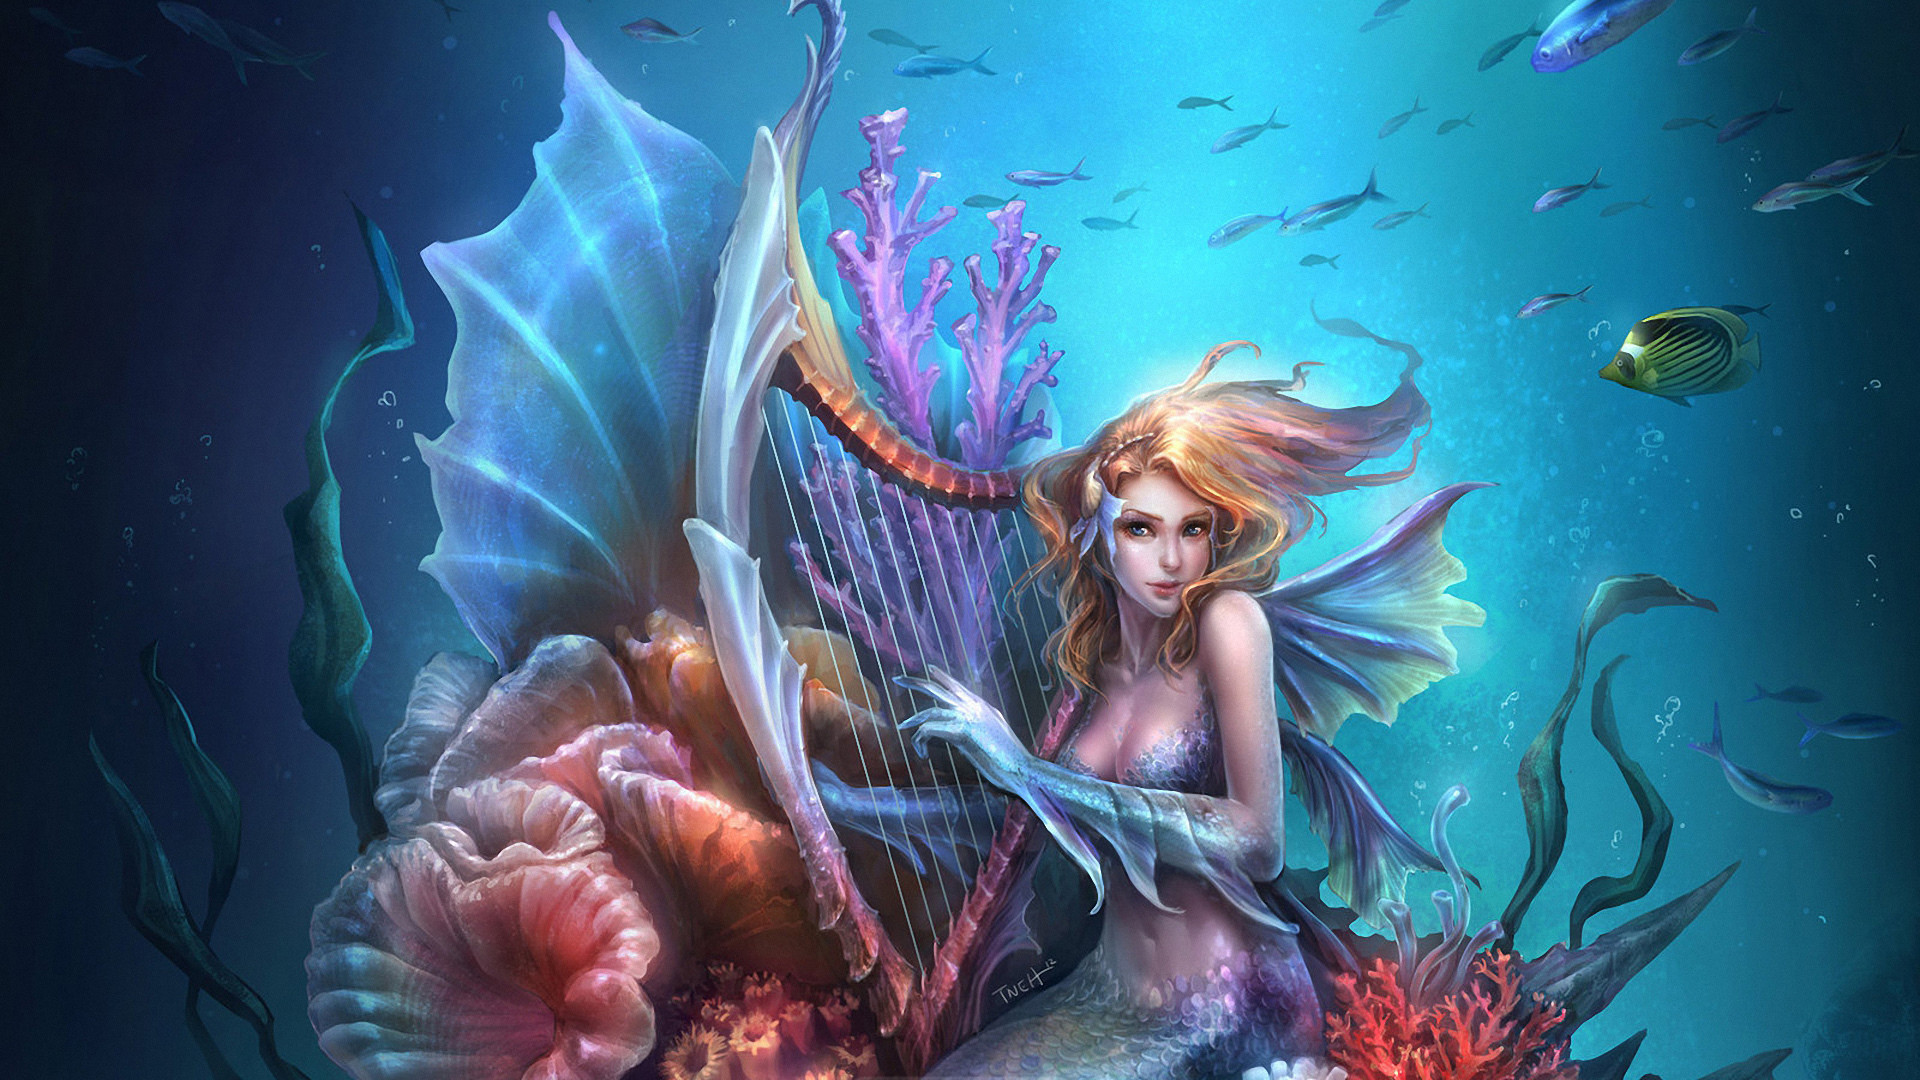 Fantasy – Mermaid Wallpapers and Backgrounds ID 341002